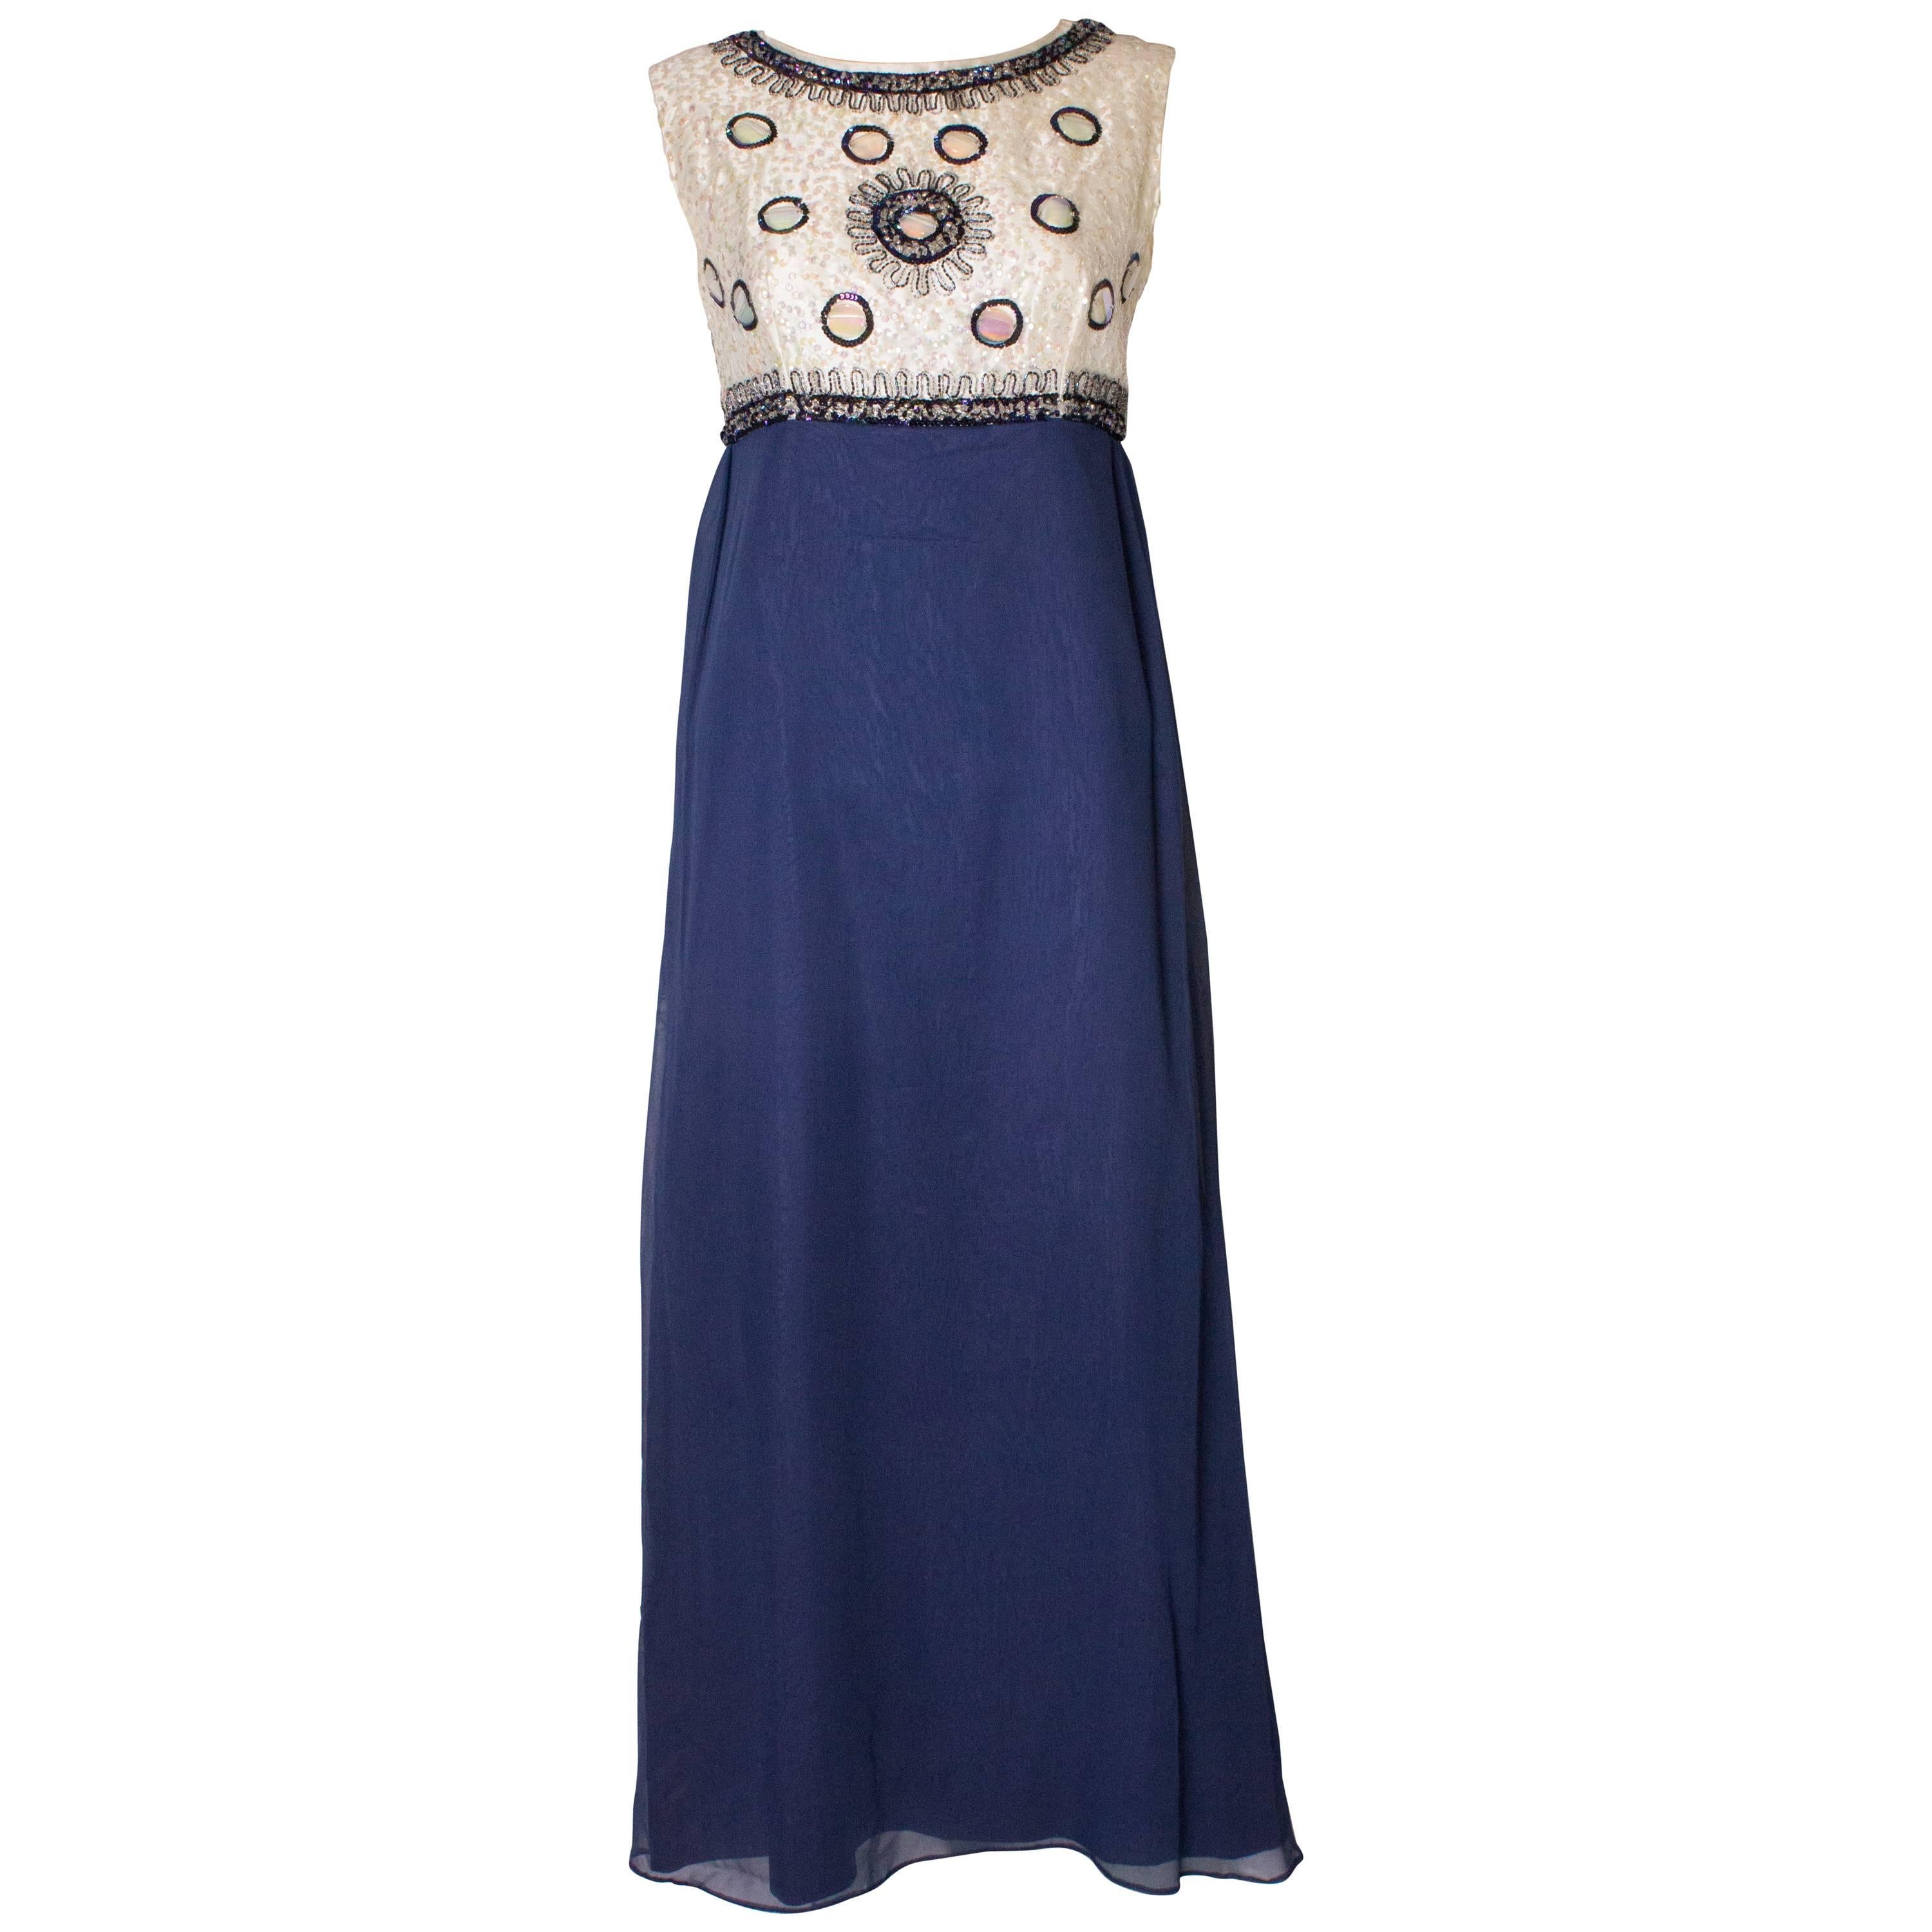 A Vintage 1960s sequin blue chiffon evening gown by Laura Phillips